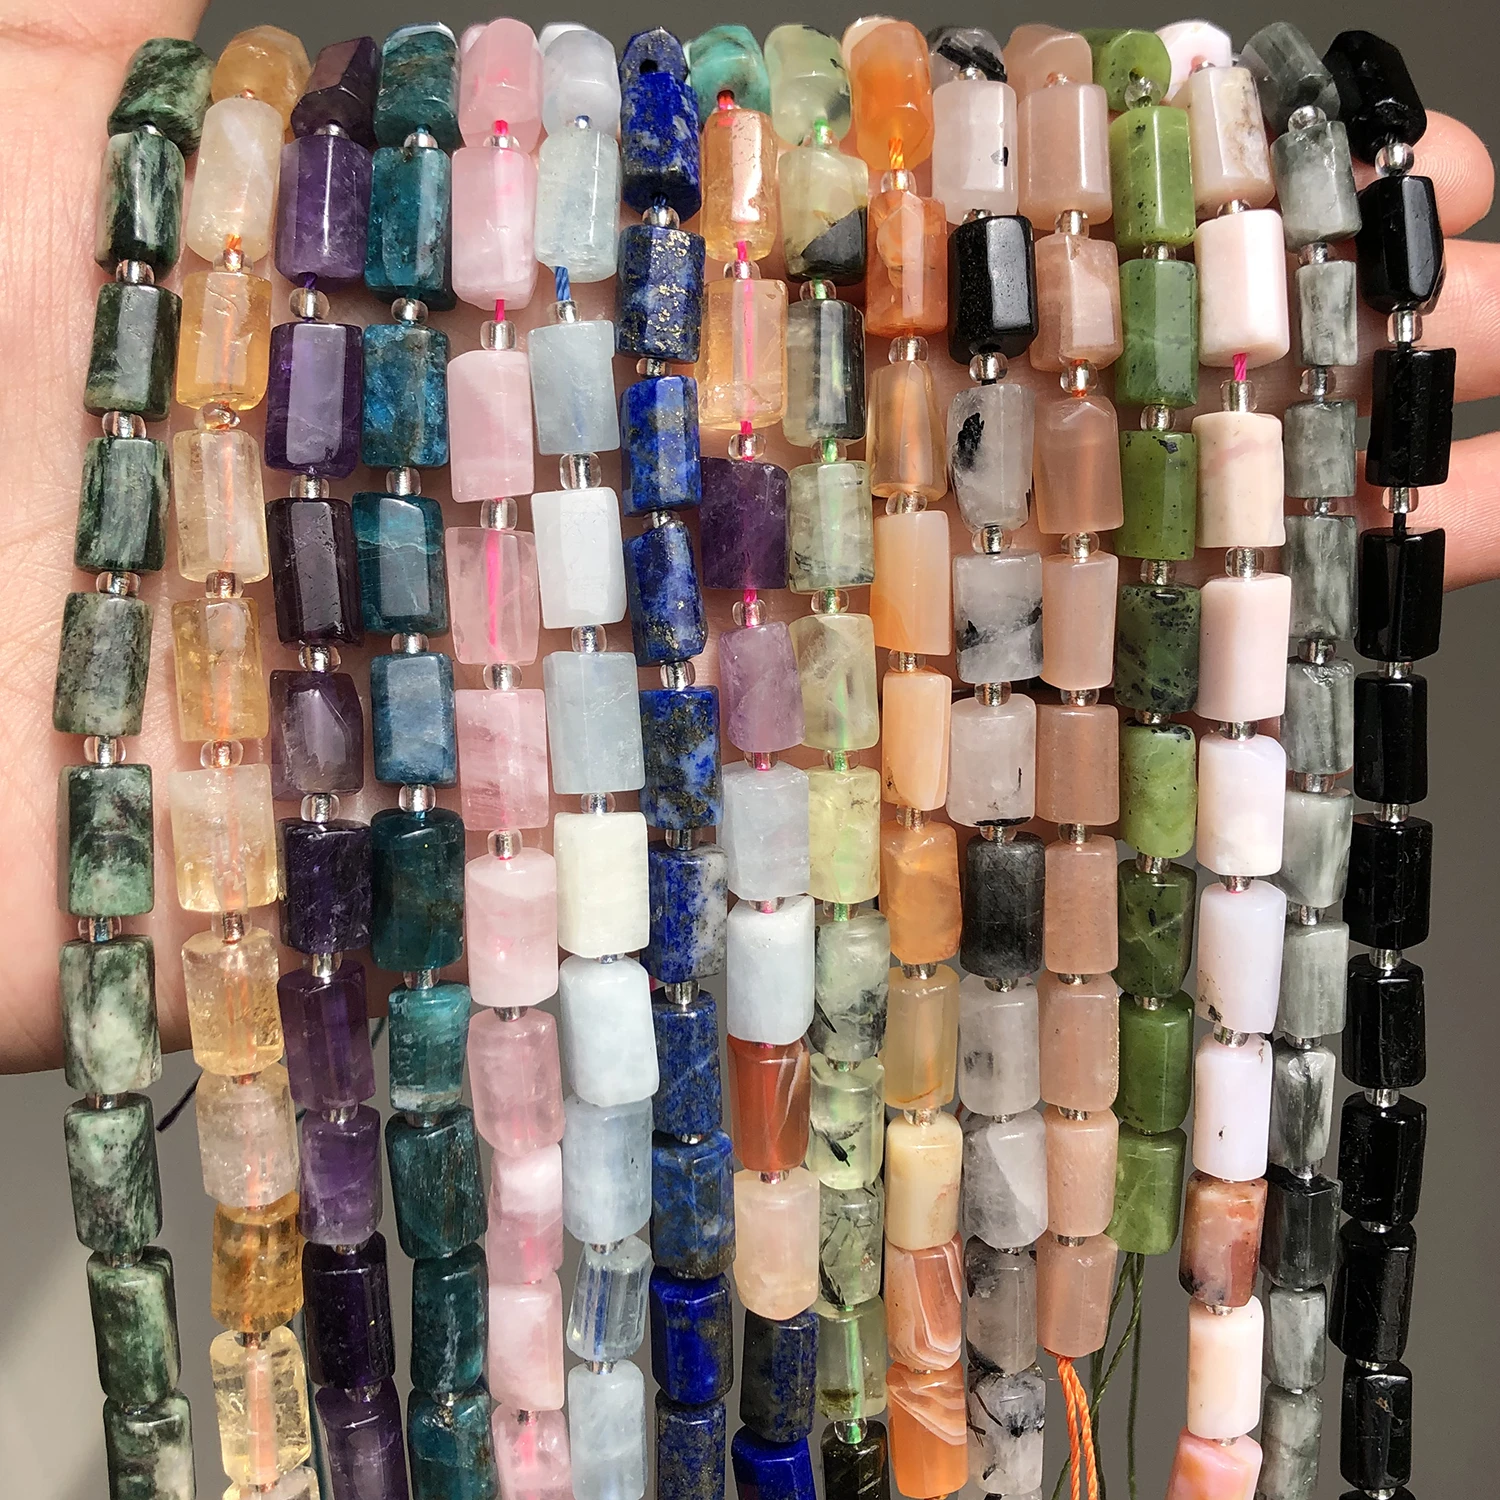 Natural Emeralds Agates Apatite Stone Beads Cylinder Shape Loose Beads for Jewelry Making DIY Charms Bracelet Accessories 7.5''